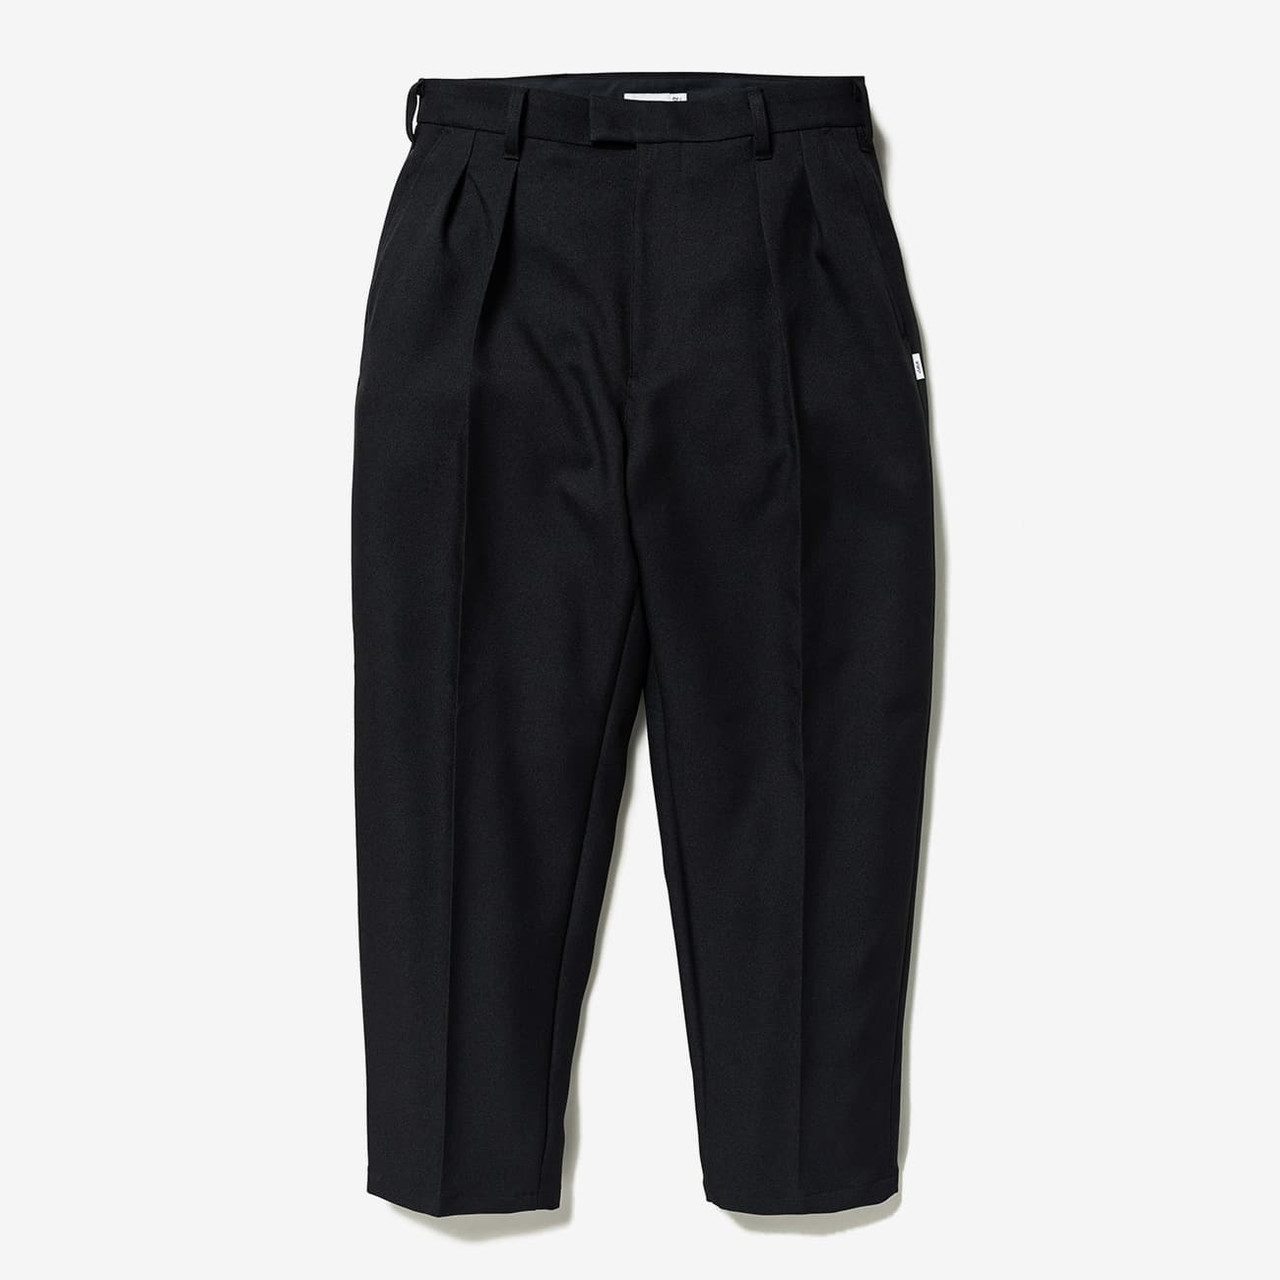 TRDT1801 / TROUSERS / POLY. TWILL 232TQDT-PTM02